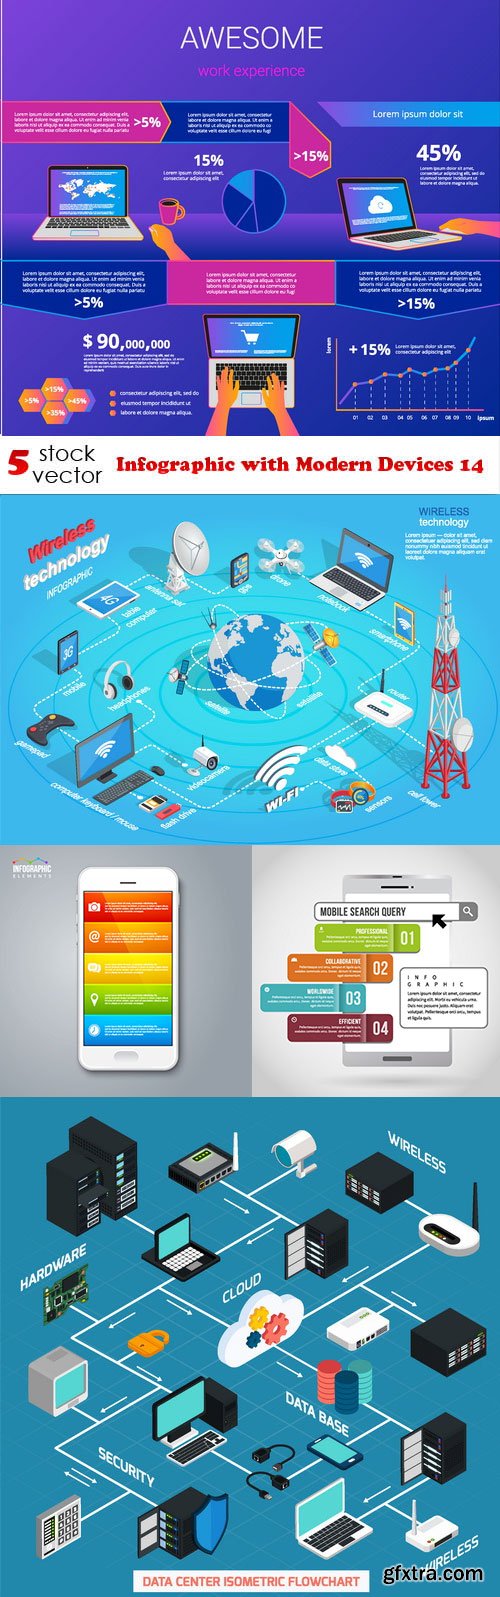 Vectors - Infographic with Modern Devices 14